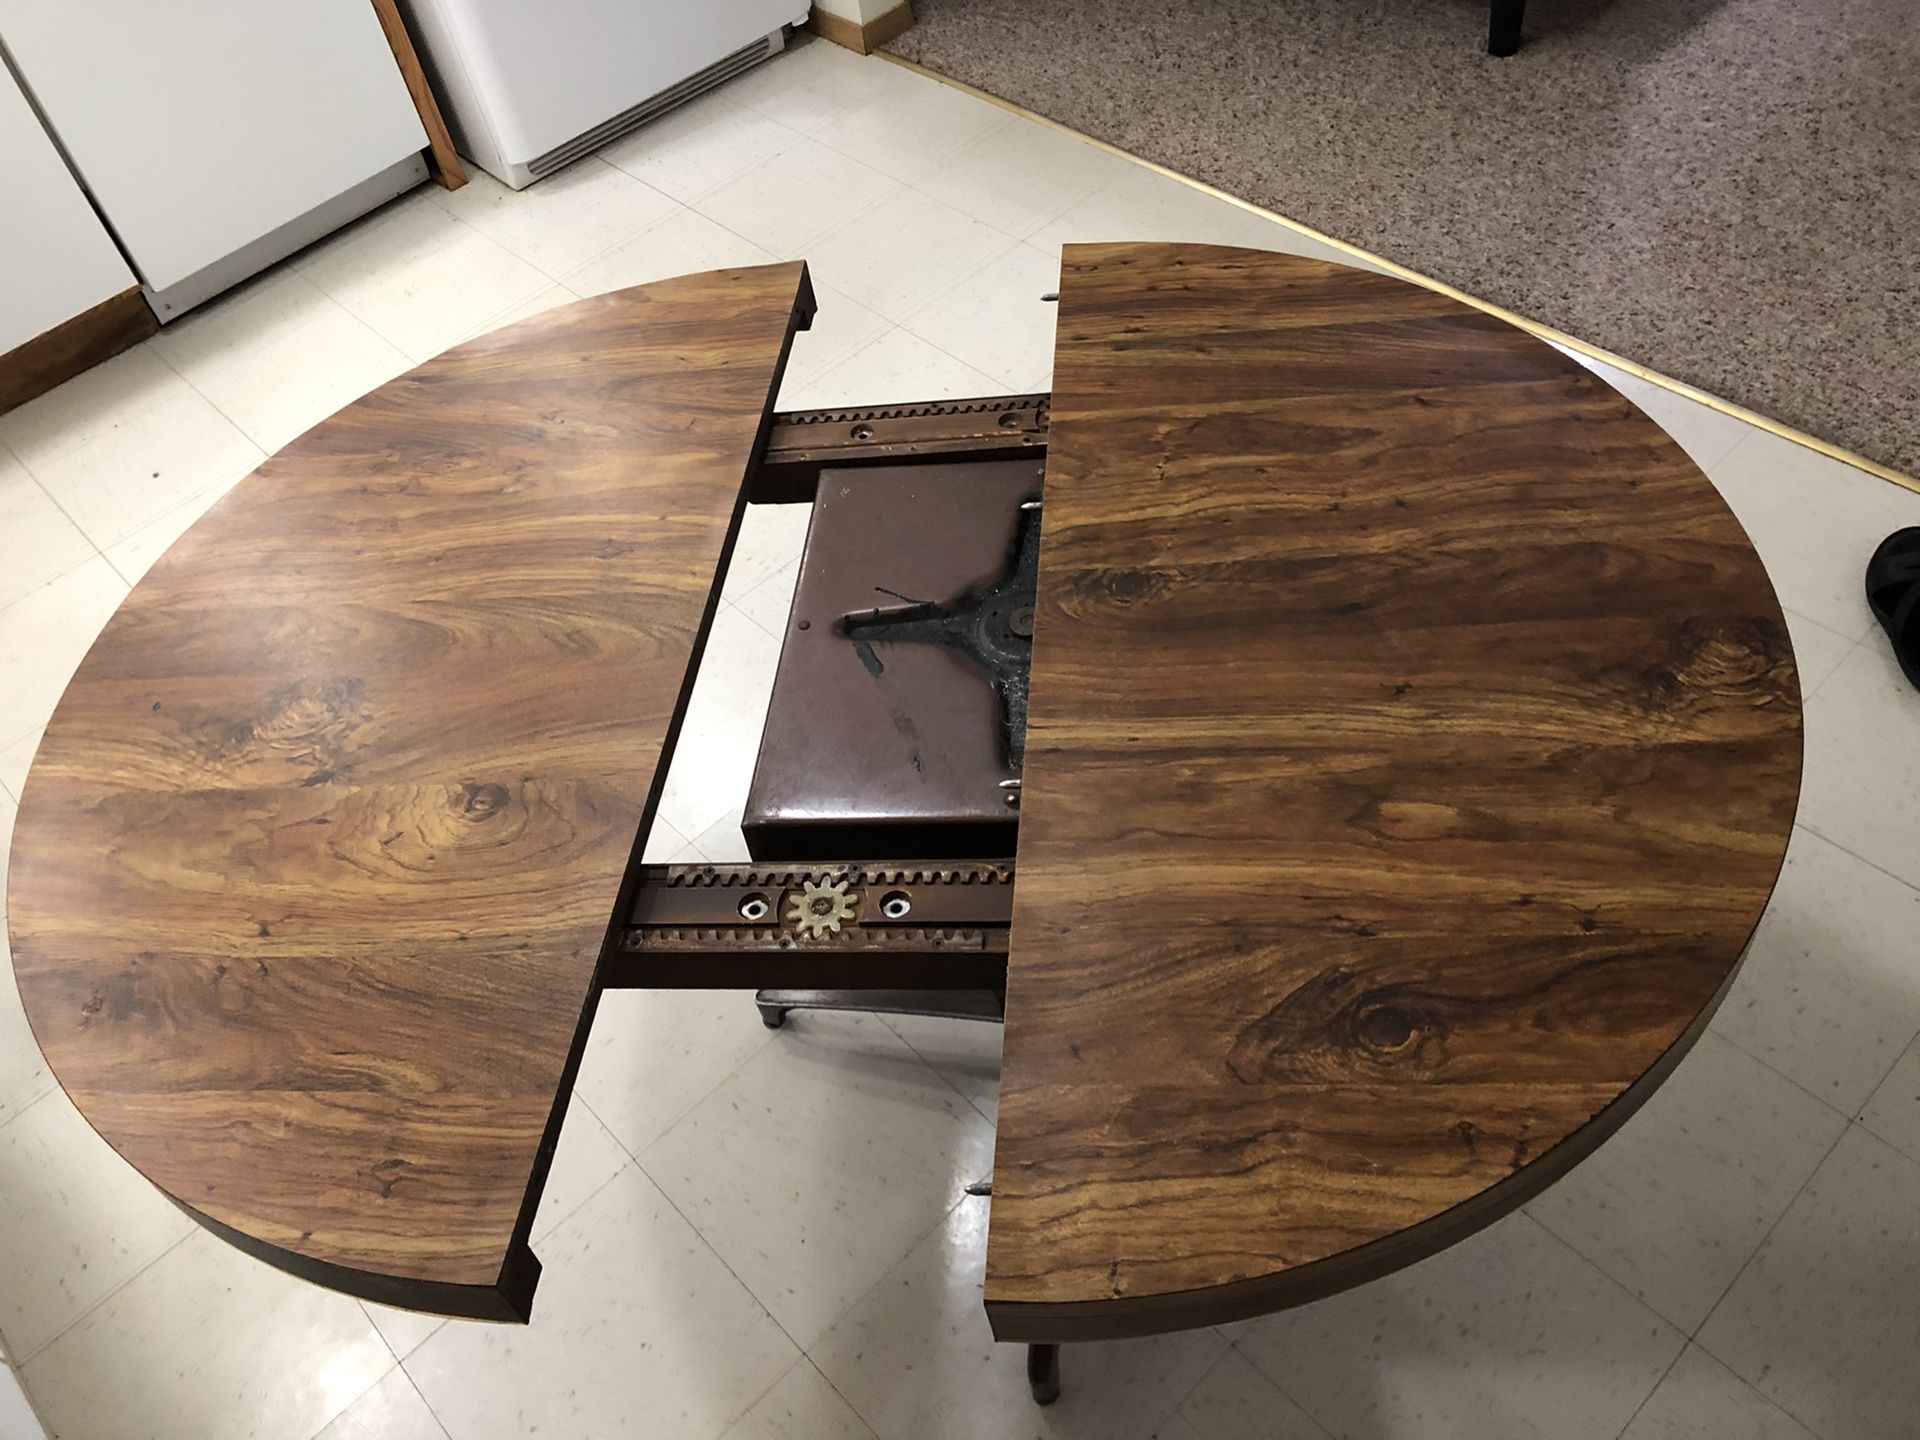 Extendable kitchen & dining table for $35